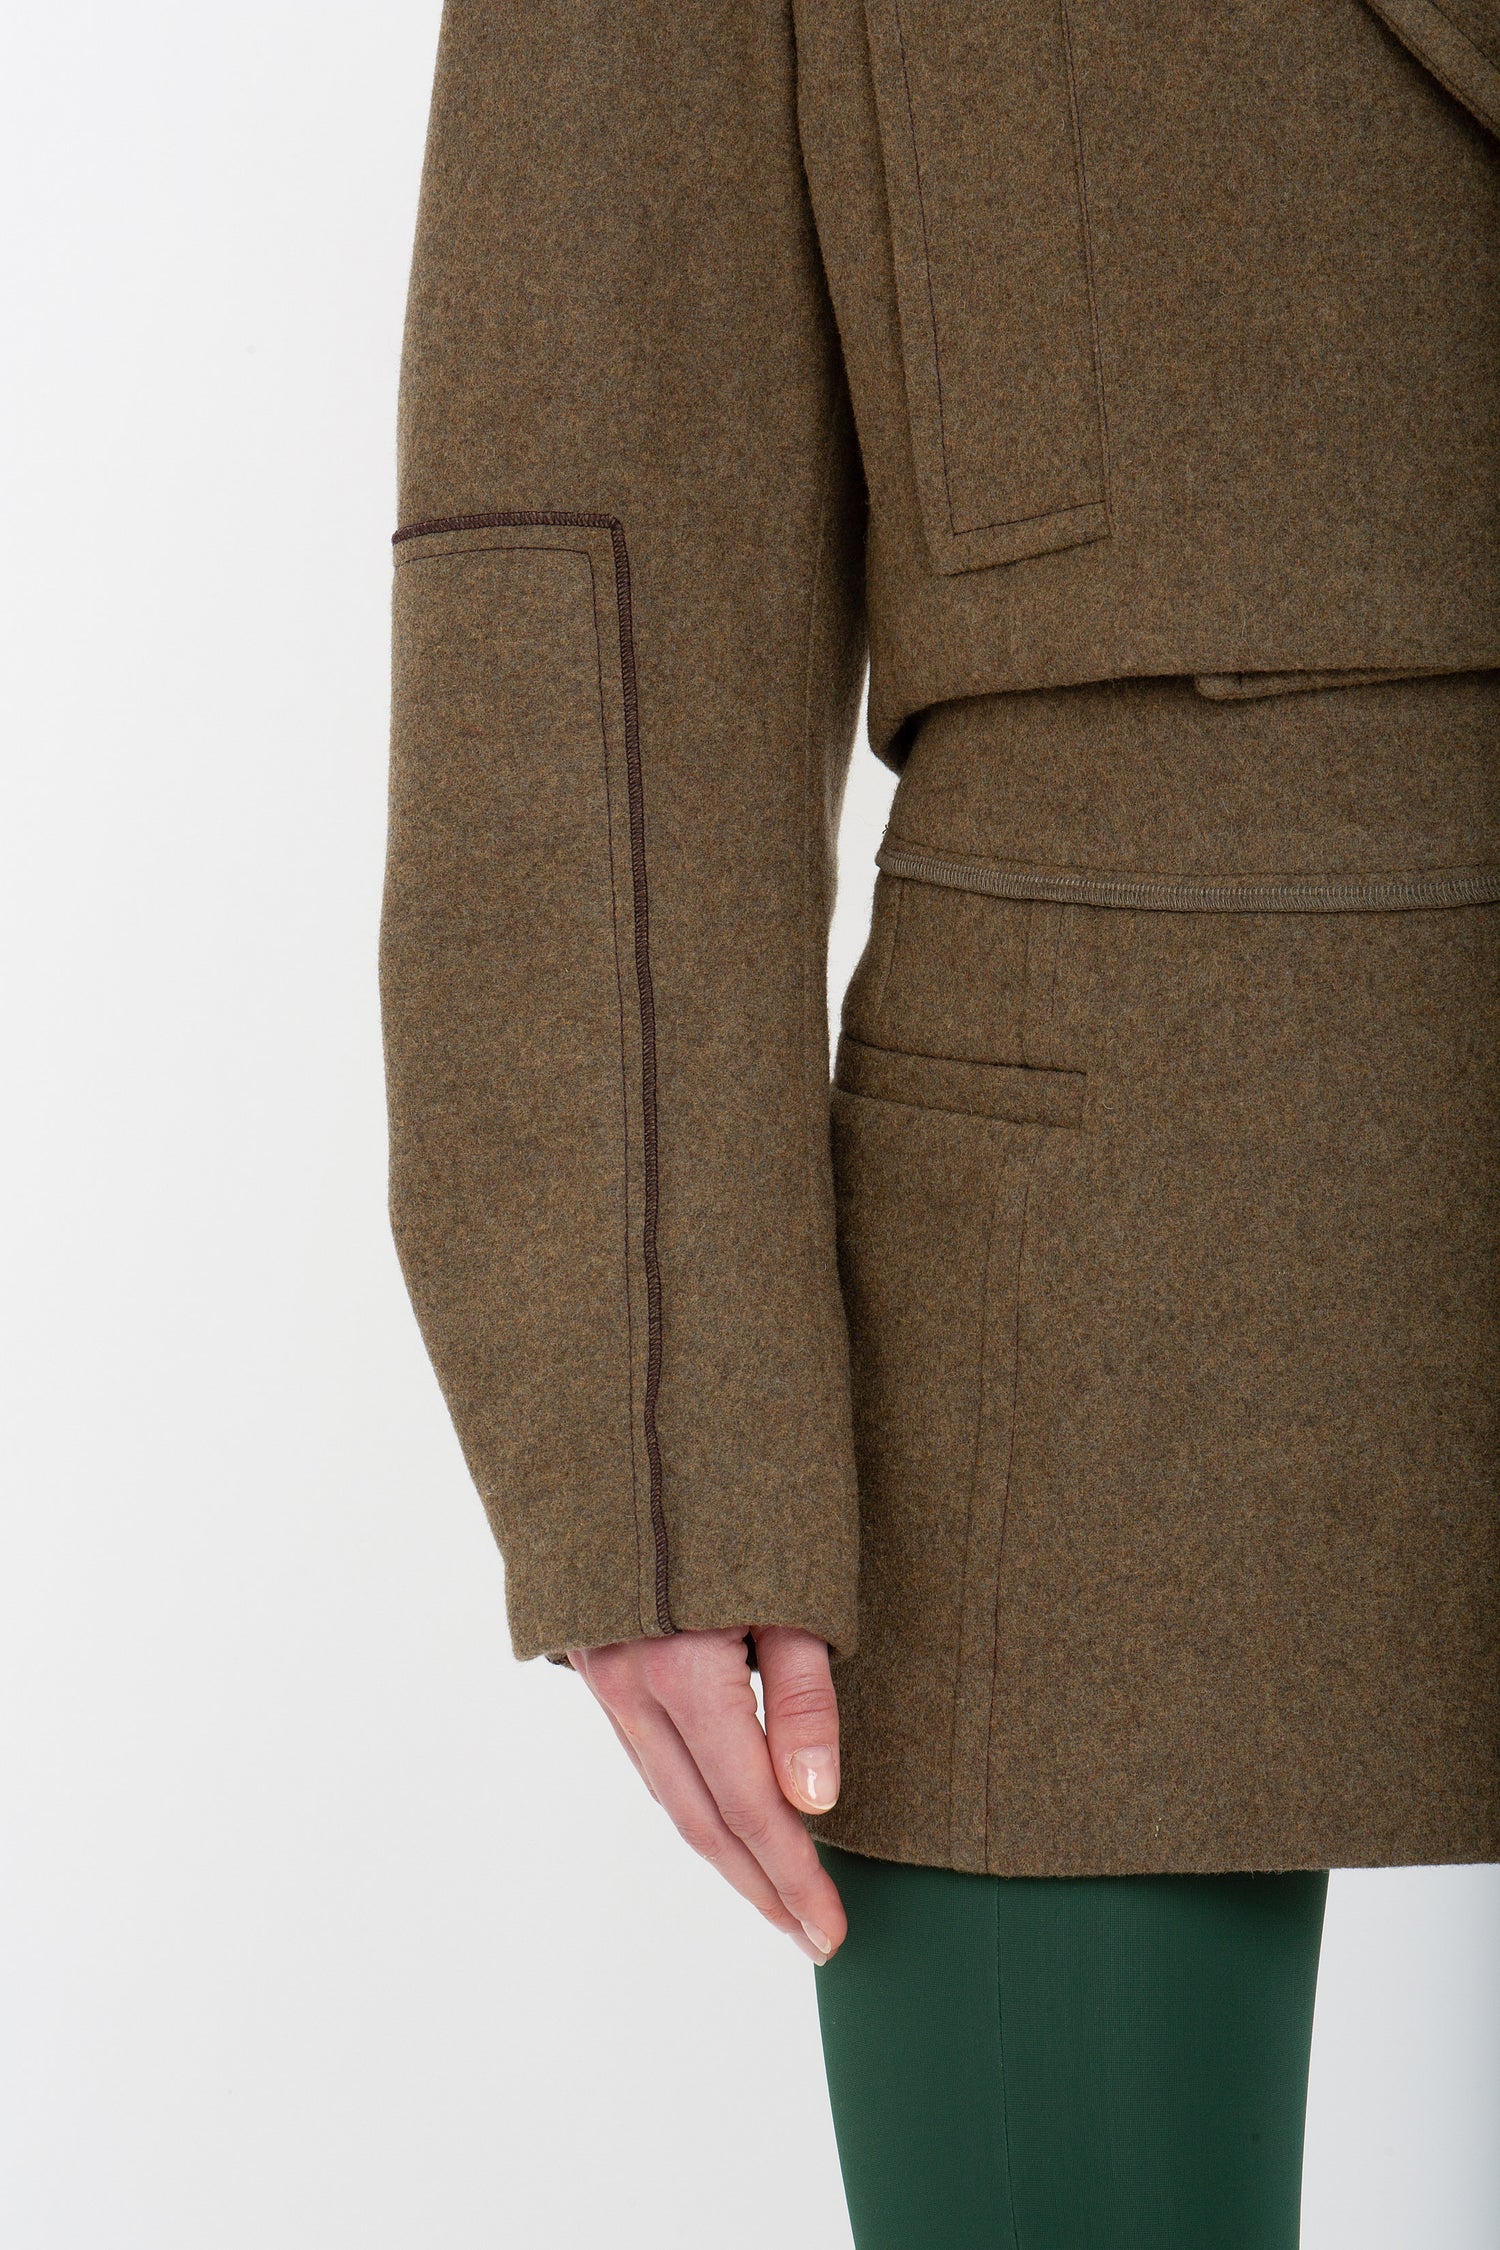 Close-up of a person wearing a brown coat of merino wool and a Victoria Beckham Tailored Mini Skirt In Khaki. Only the lower half of the coat and the upper part of the skirt are visible along with one hand touching the coat's pocket.